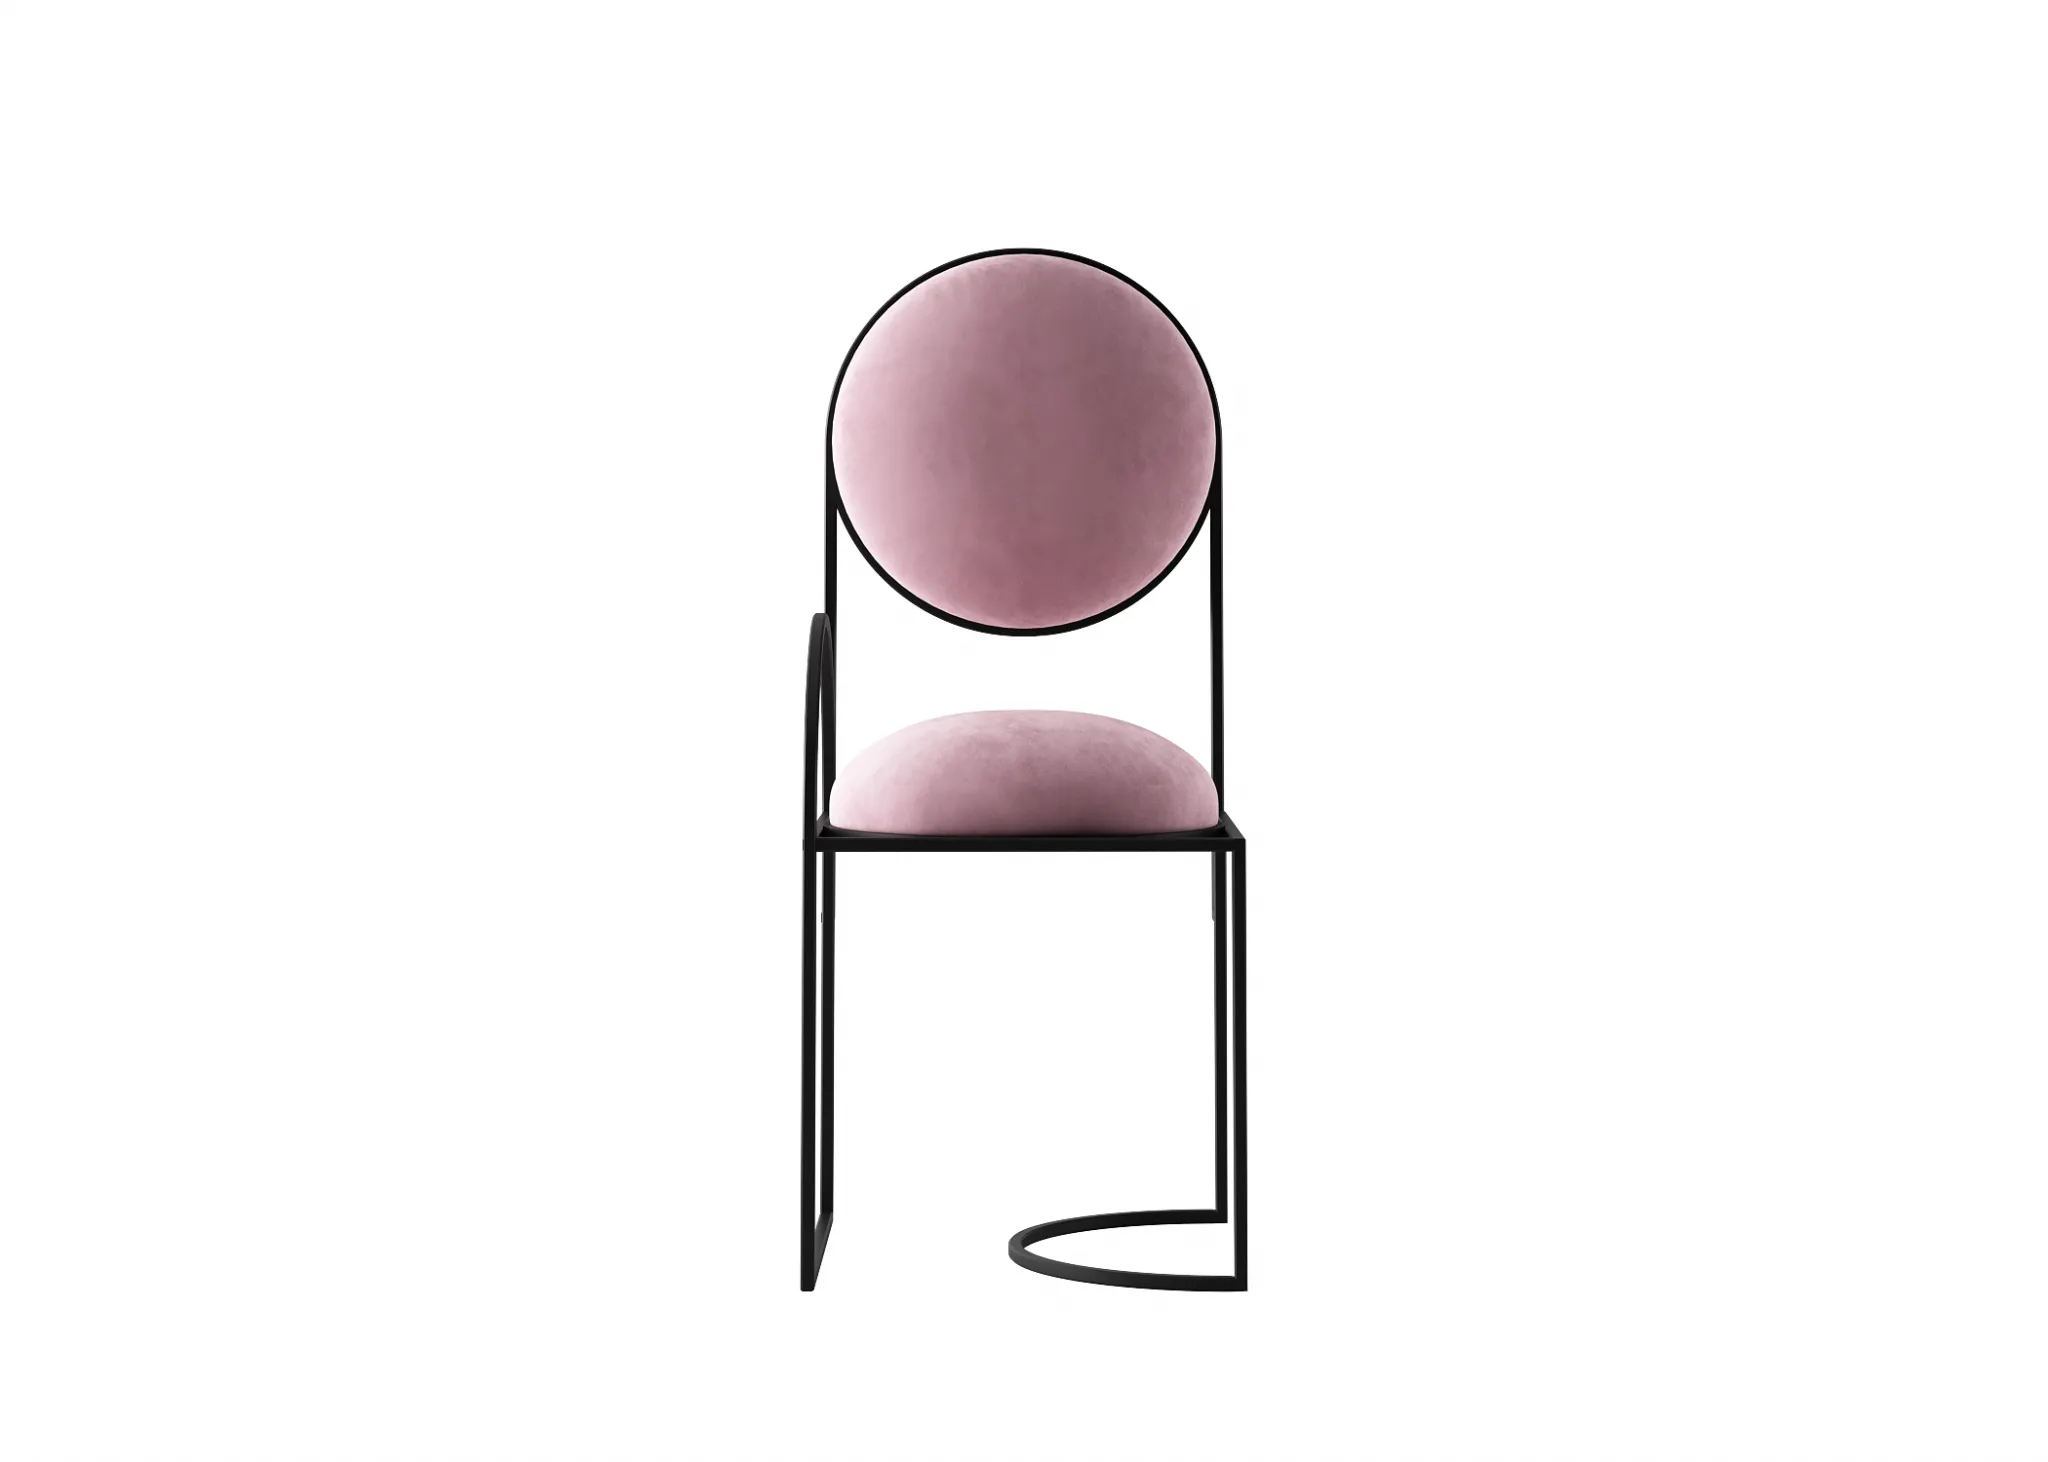 FURNITURE 3D MODELS – CHAIRS – 0366